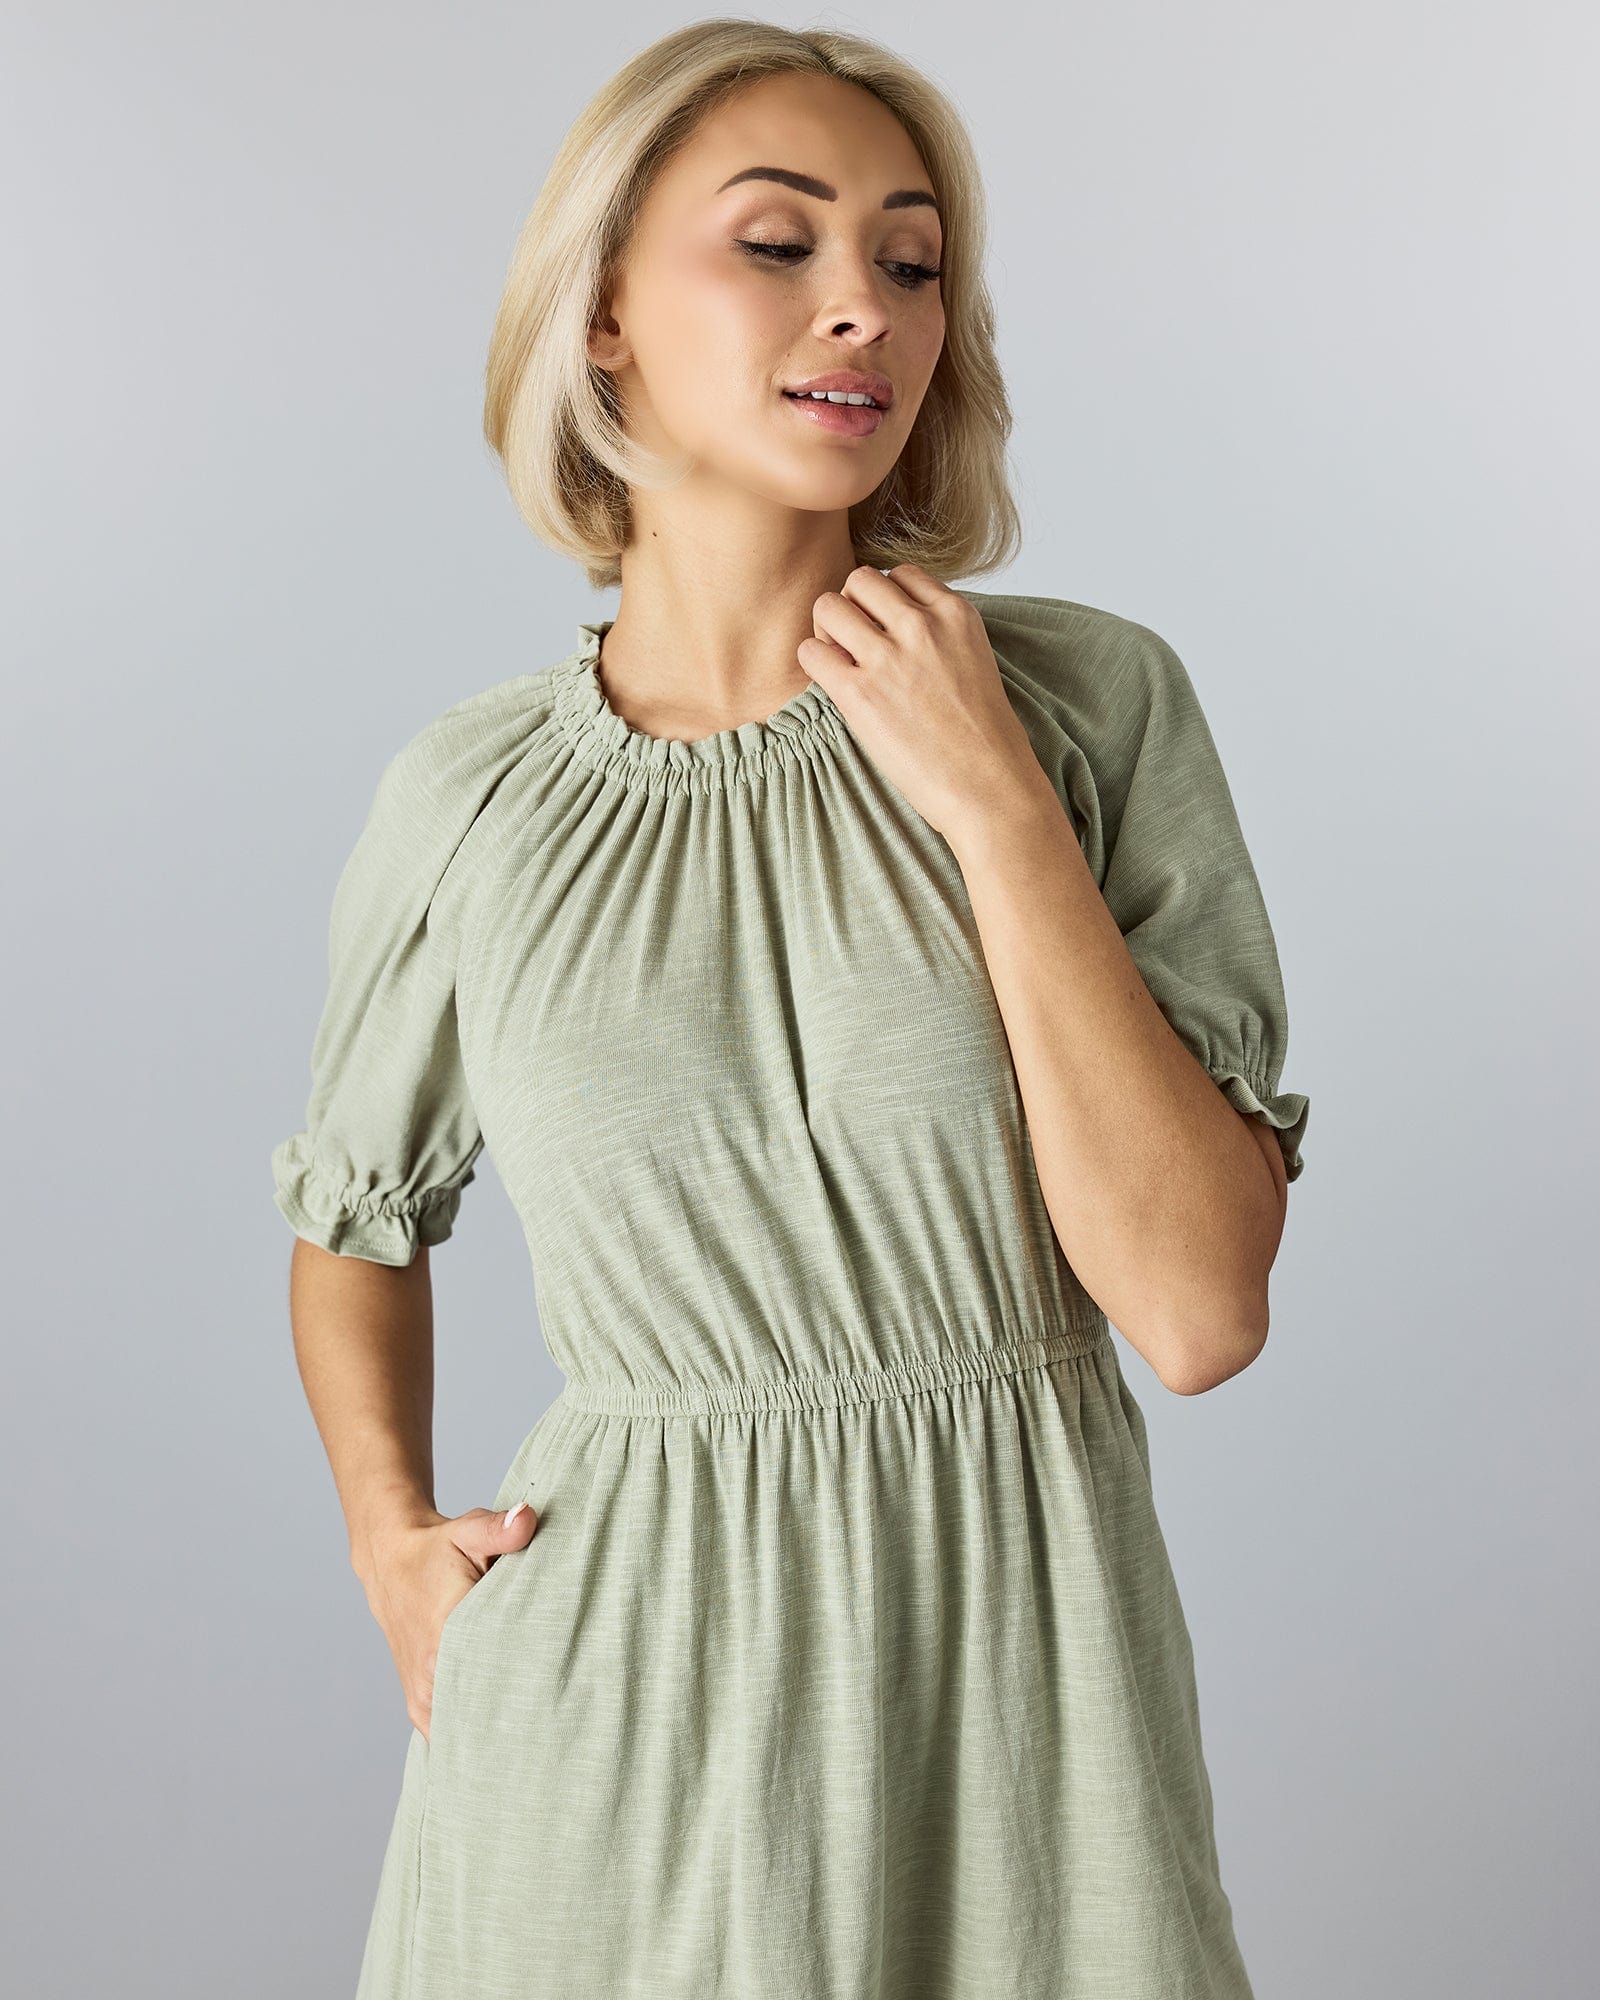 Woman in a green, knee-length, short sleeve dress with a high neckline and ruffles at neck and arms.